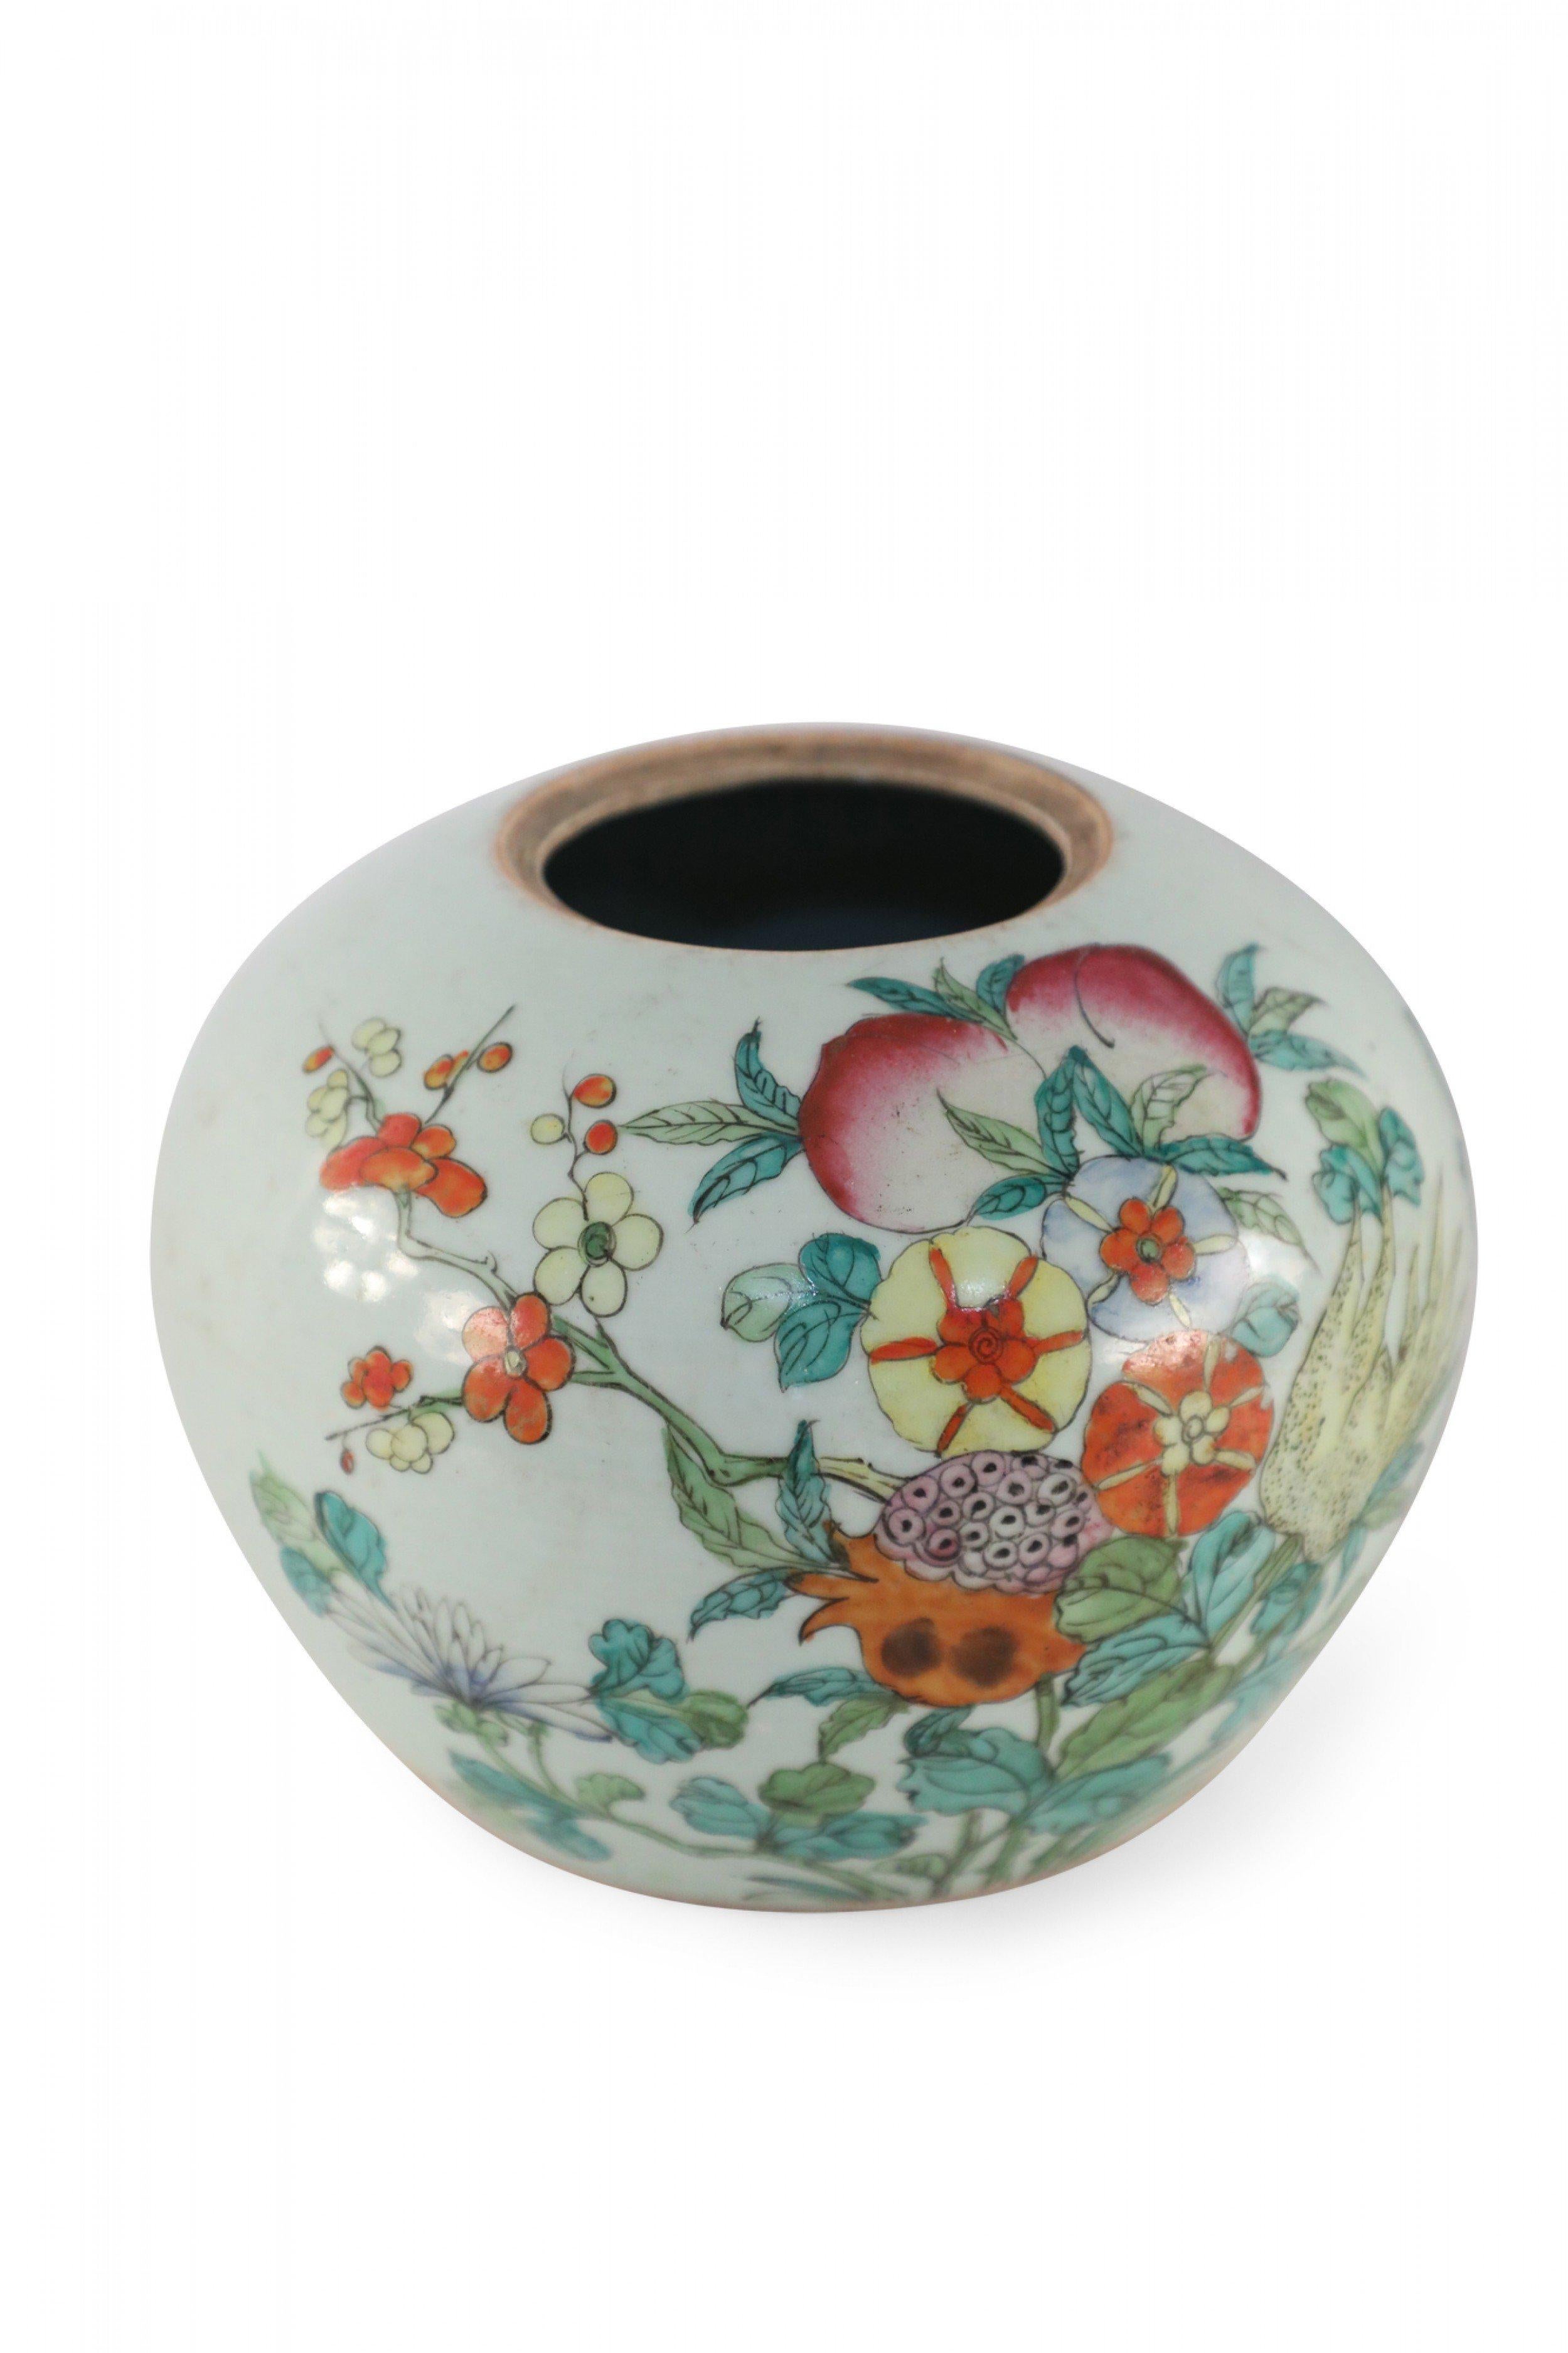 Chinese White and Floral Rounded Porcelain Watermelon Jar For Sale 1